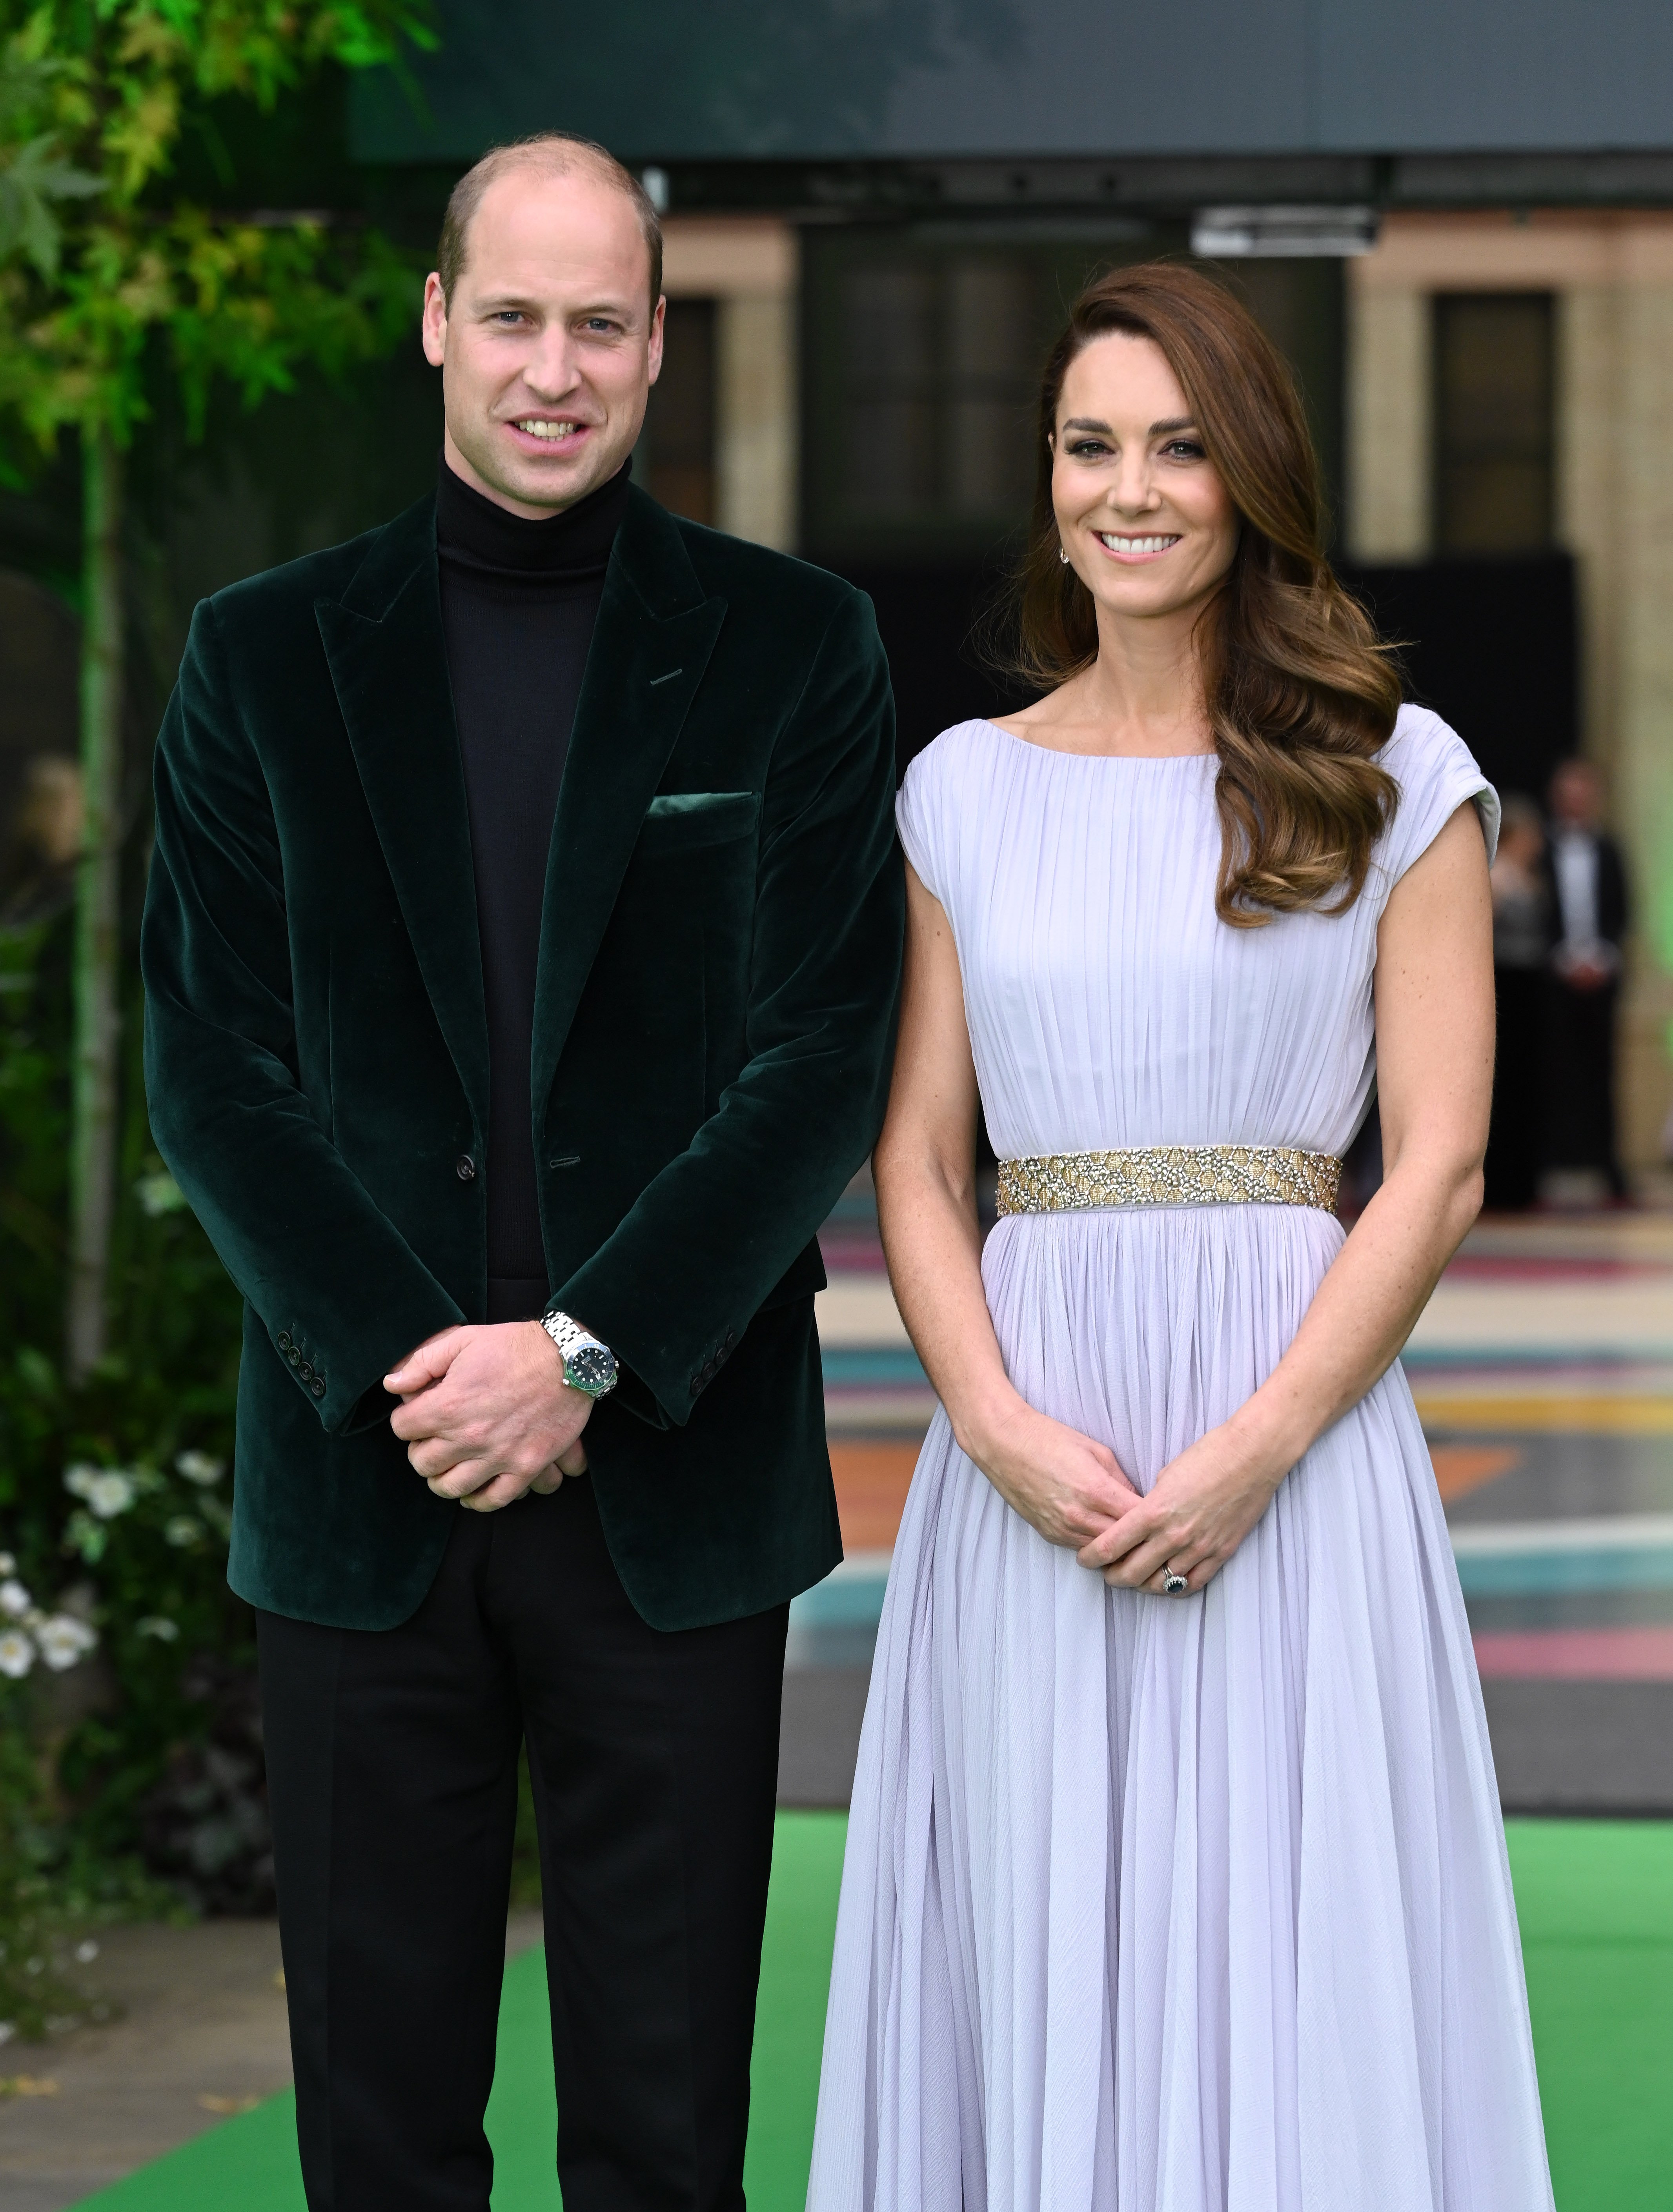 Prince William, Duke of Cambridge and Kate Middleton, Duchess of Cambridge during the Earthshot Prize 2021 at Alexandra Palace on October 17, 2021 in London, England. | Source: Getty Images